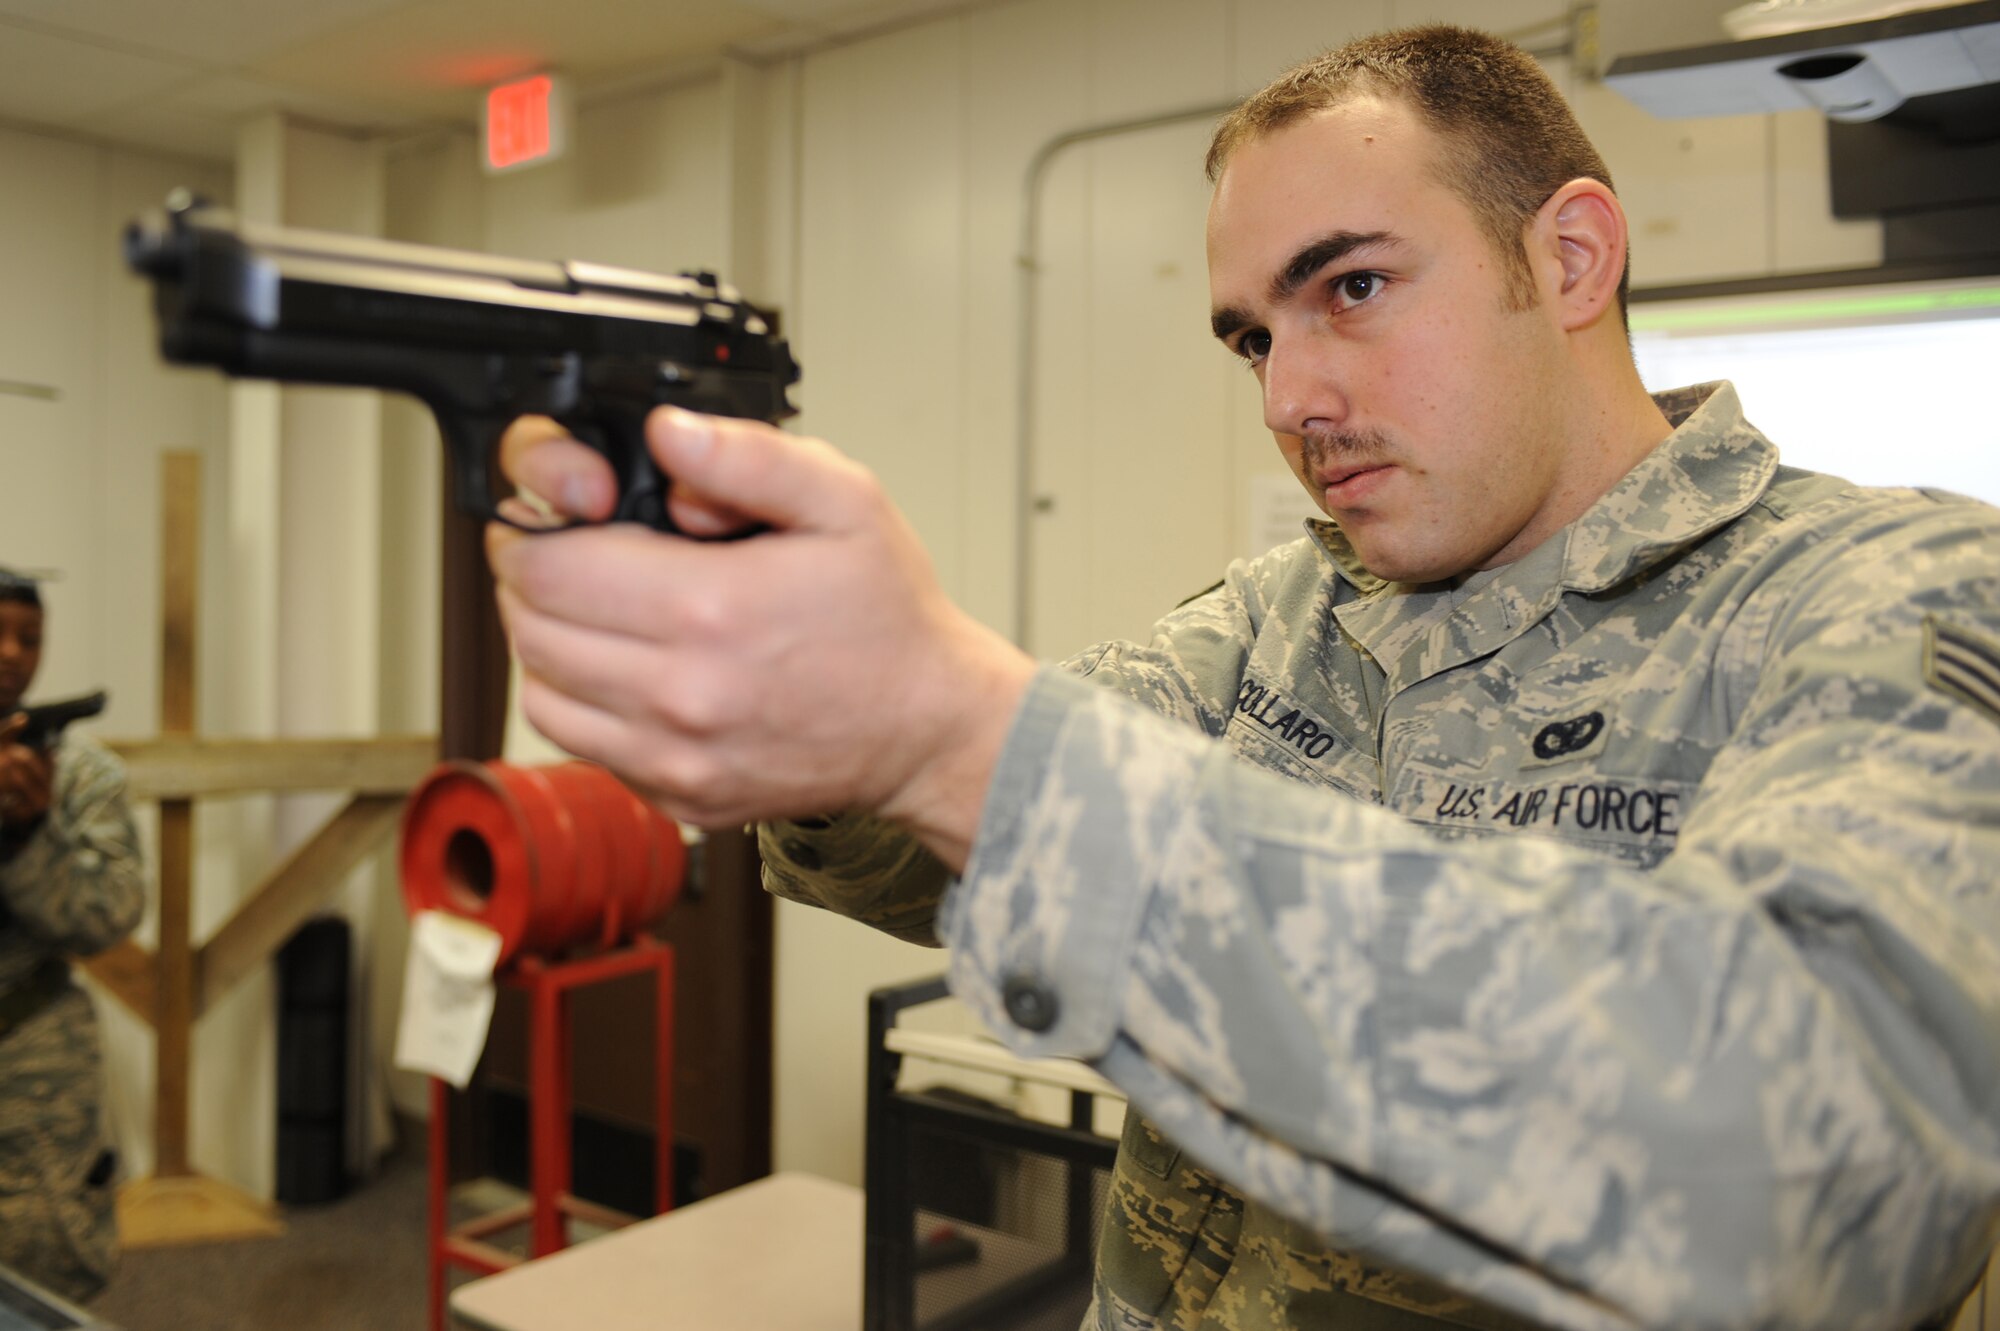 WHITEMAN AIR FORCE BASE, Mo. - Senior Airman Robert Collaro, 509th Security Forces Squadron combat arms instructor, demonstrates proper procedure and hand grip for an M-9 pistol the Combat Arms Training and Maintenance facility here, March 16, 2010.(U.S. Air Force photo by Airman 1st Class Carlin Leslie )(Released)
